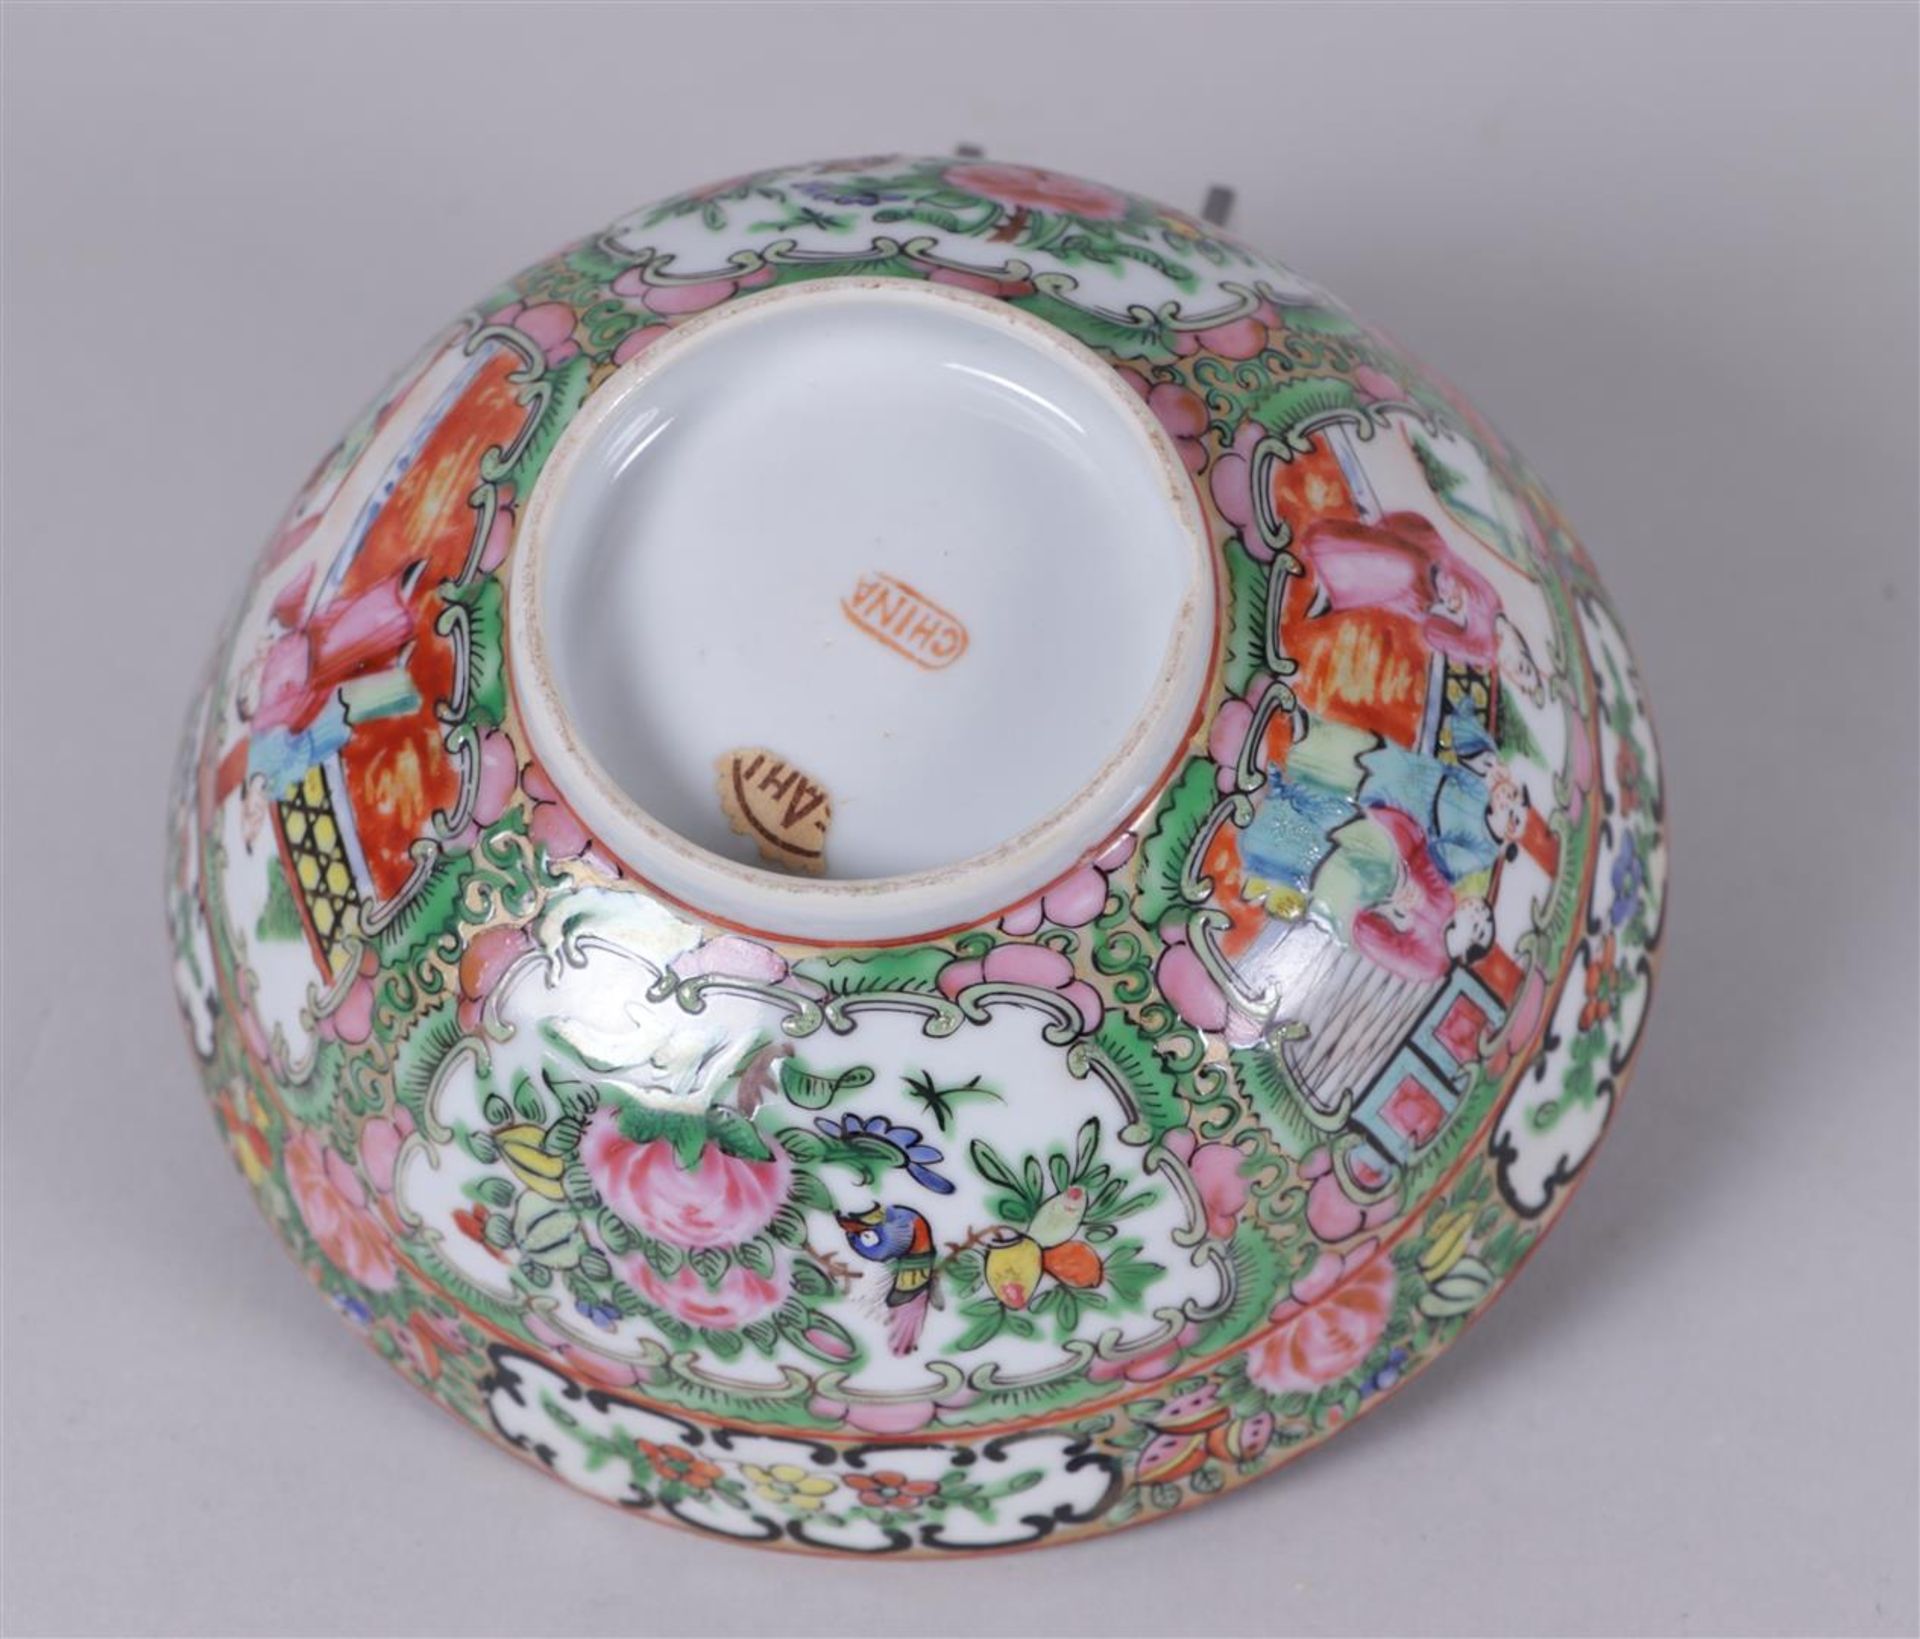 A porcelain bowl with Canton decor. China, early 20th century.
Diam. 16 cm.